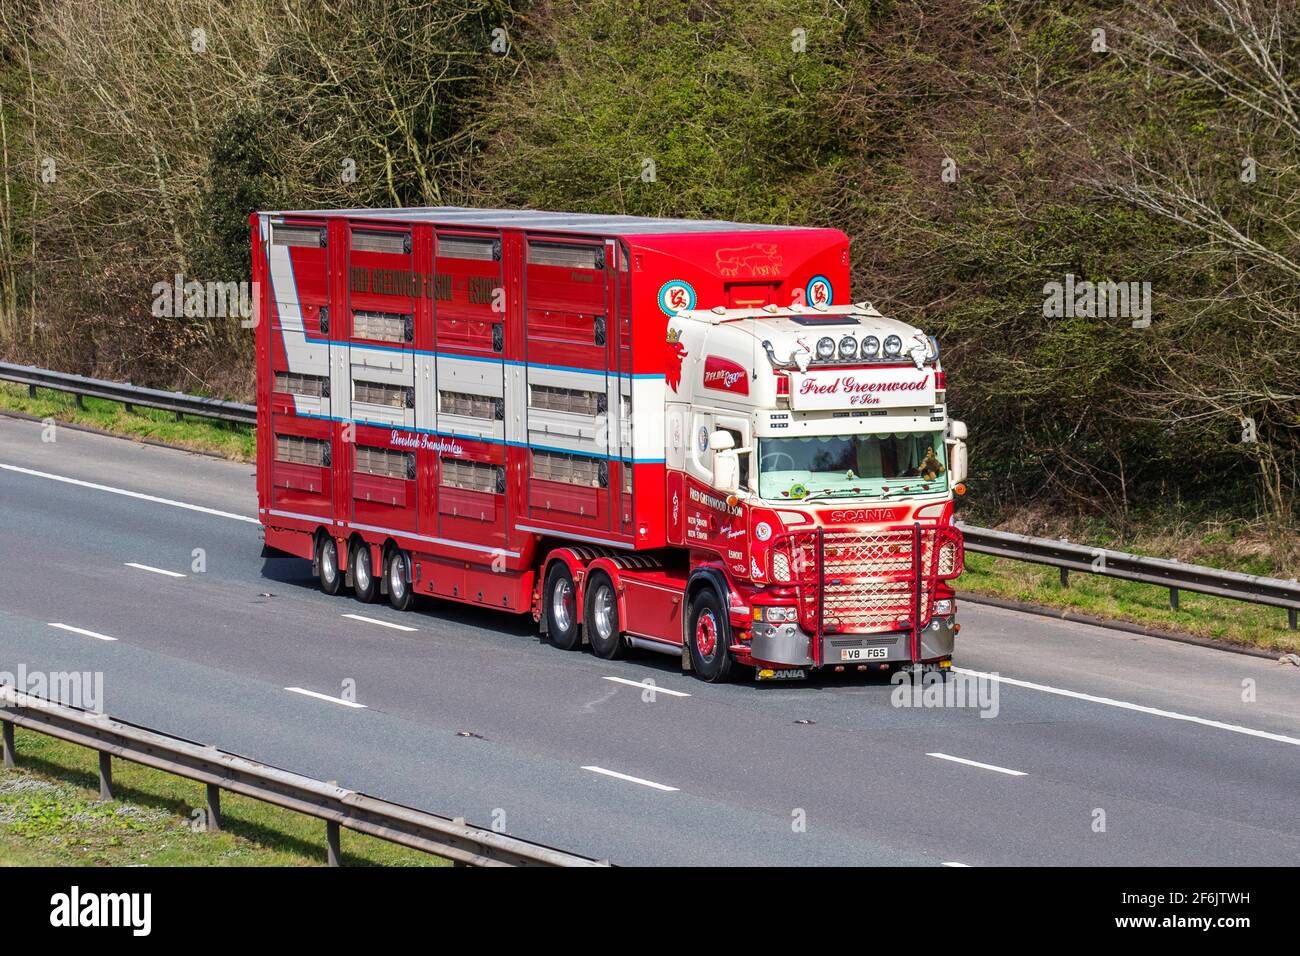 Fred Greenwood and Son Ltd Livestock transporters; cattle transport,large lorry carrying sheep, animal welfare, moving animals, sheep business, live transportation, Scania lorry on M6 Motorway UK Stock Photo